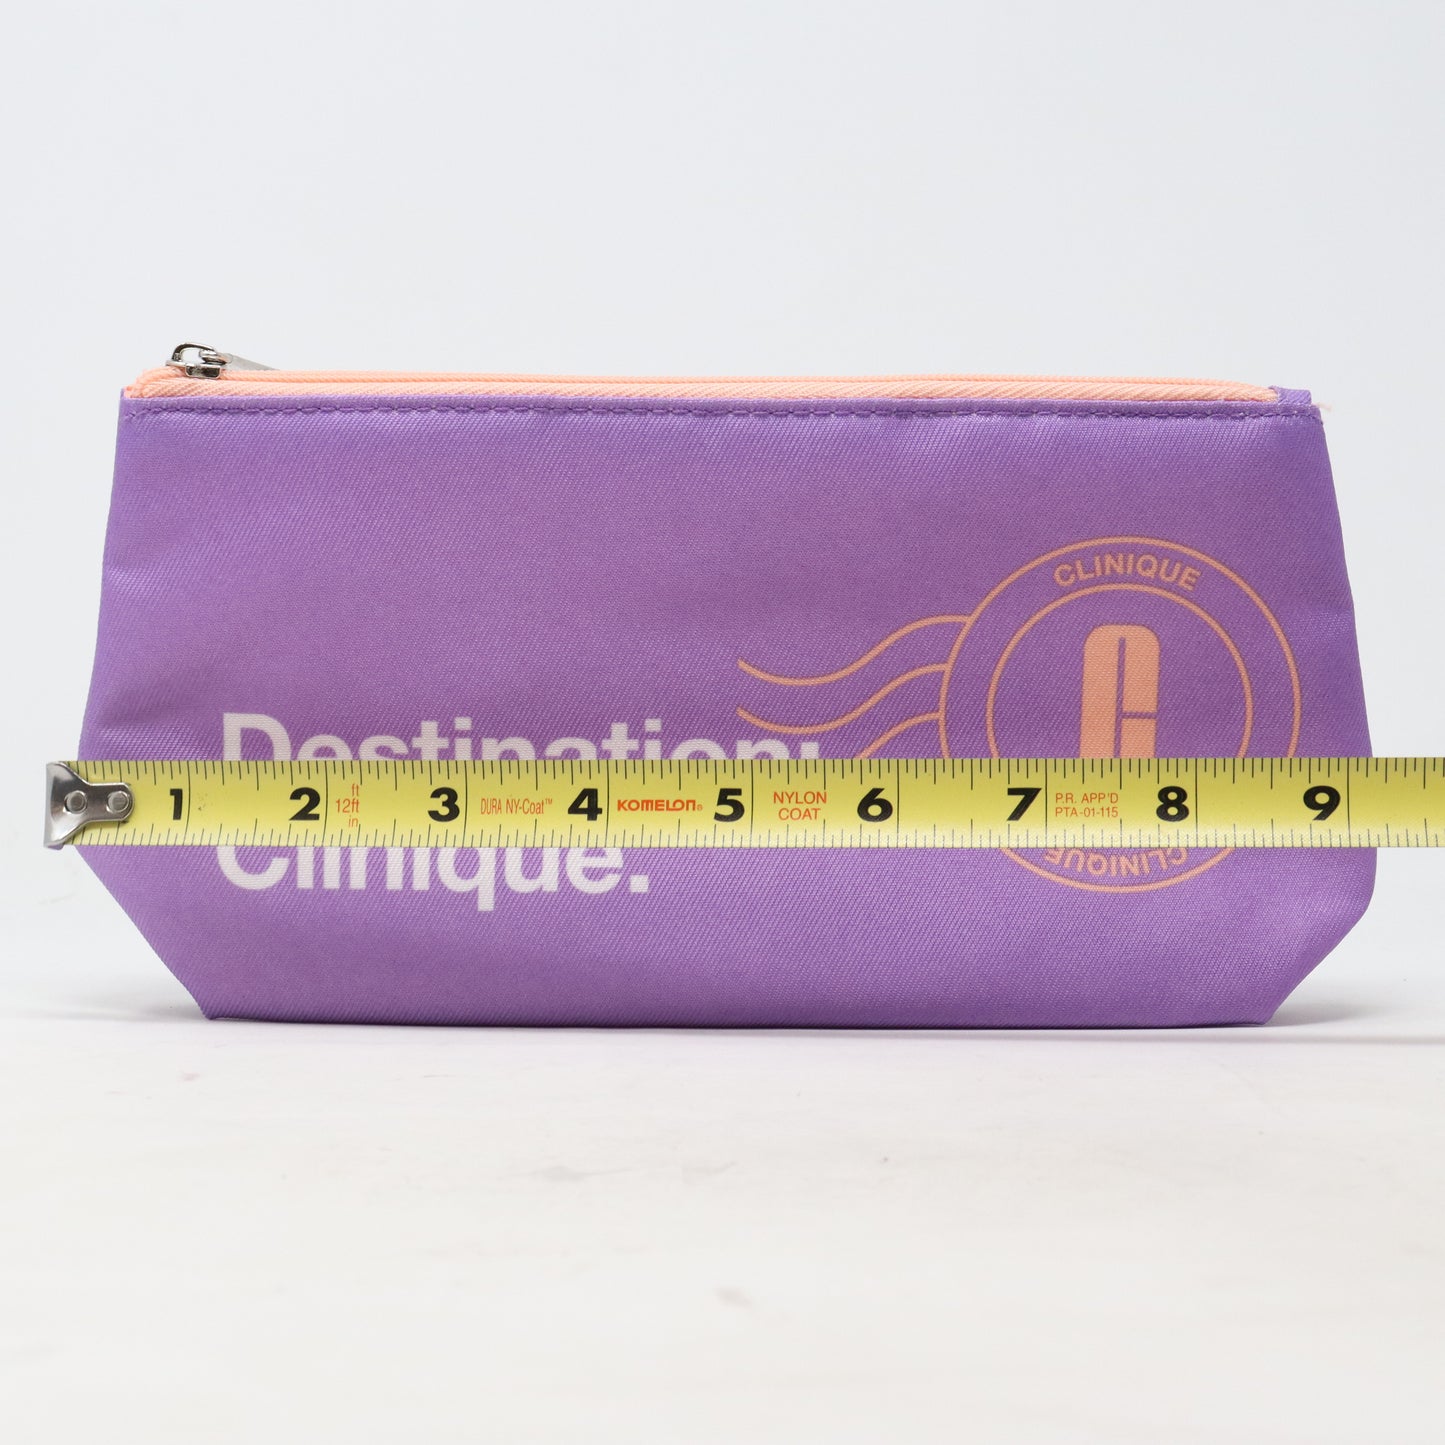 Clinique Purple/Pink Cosmetic Bag  / New